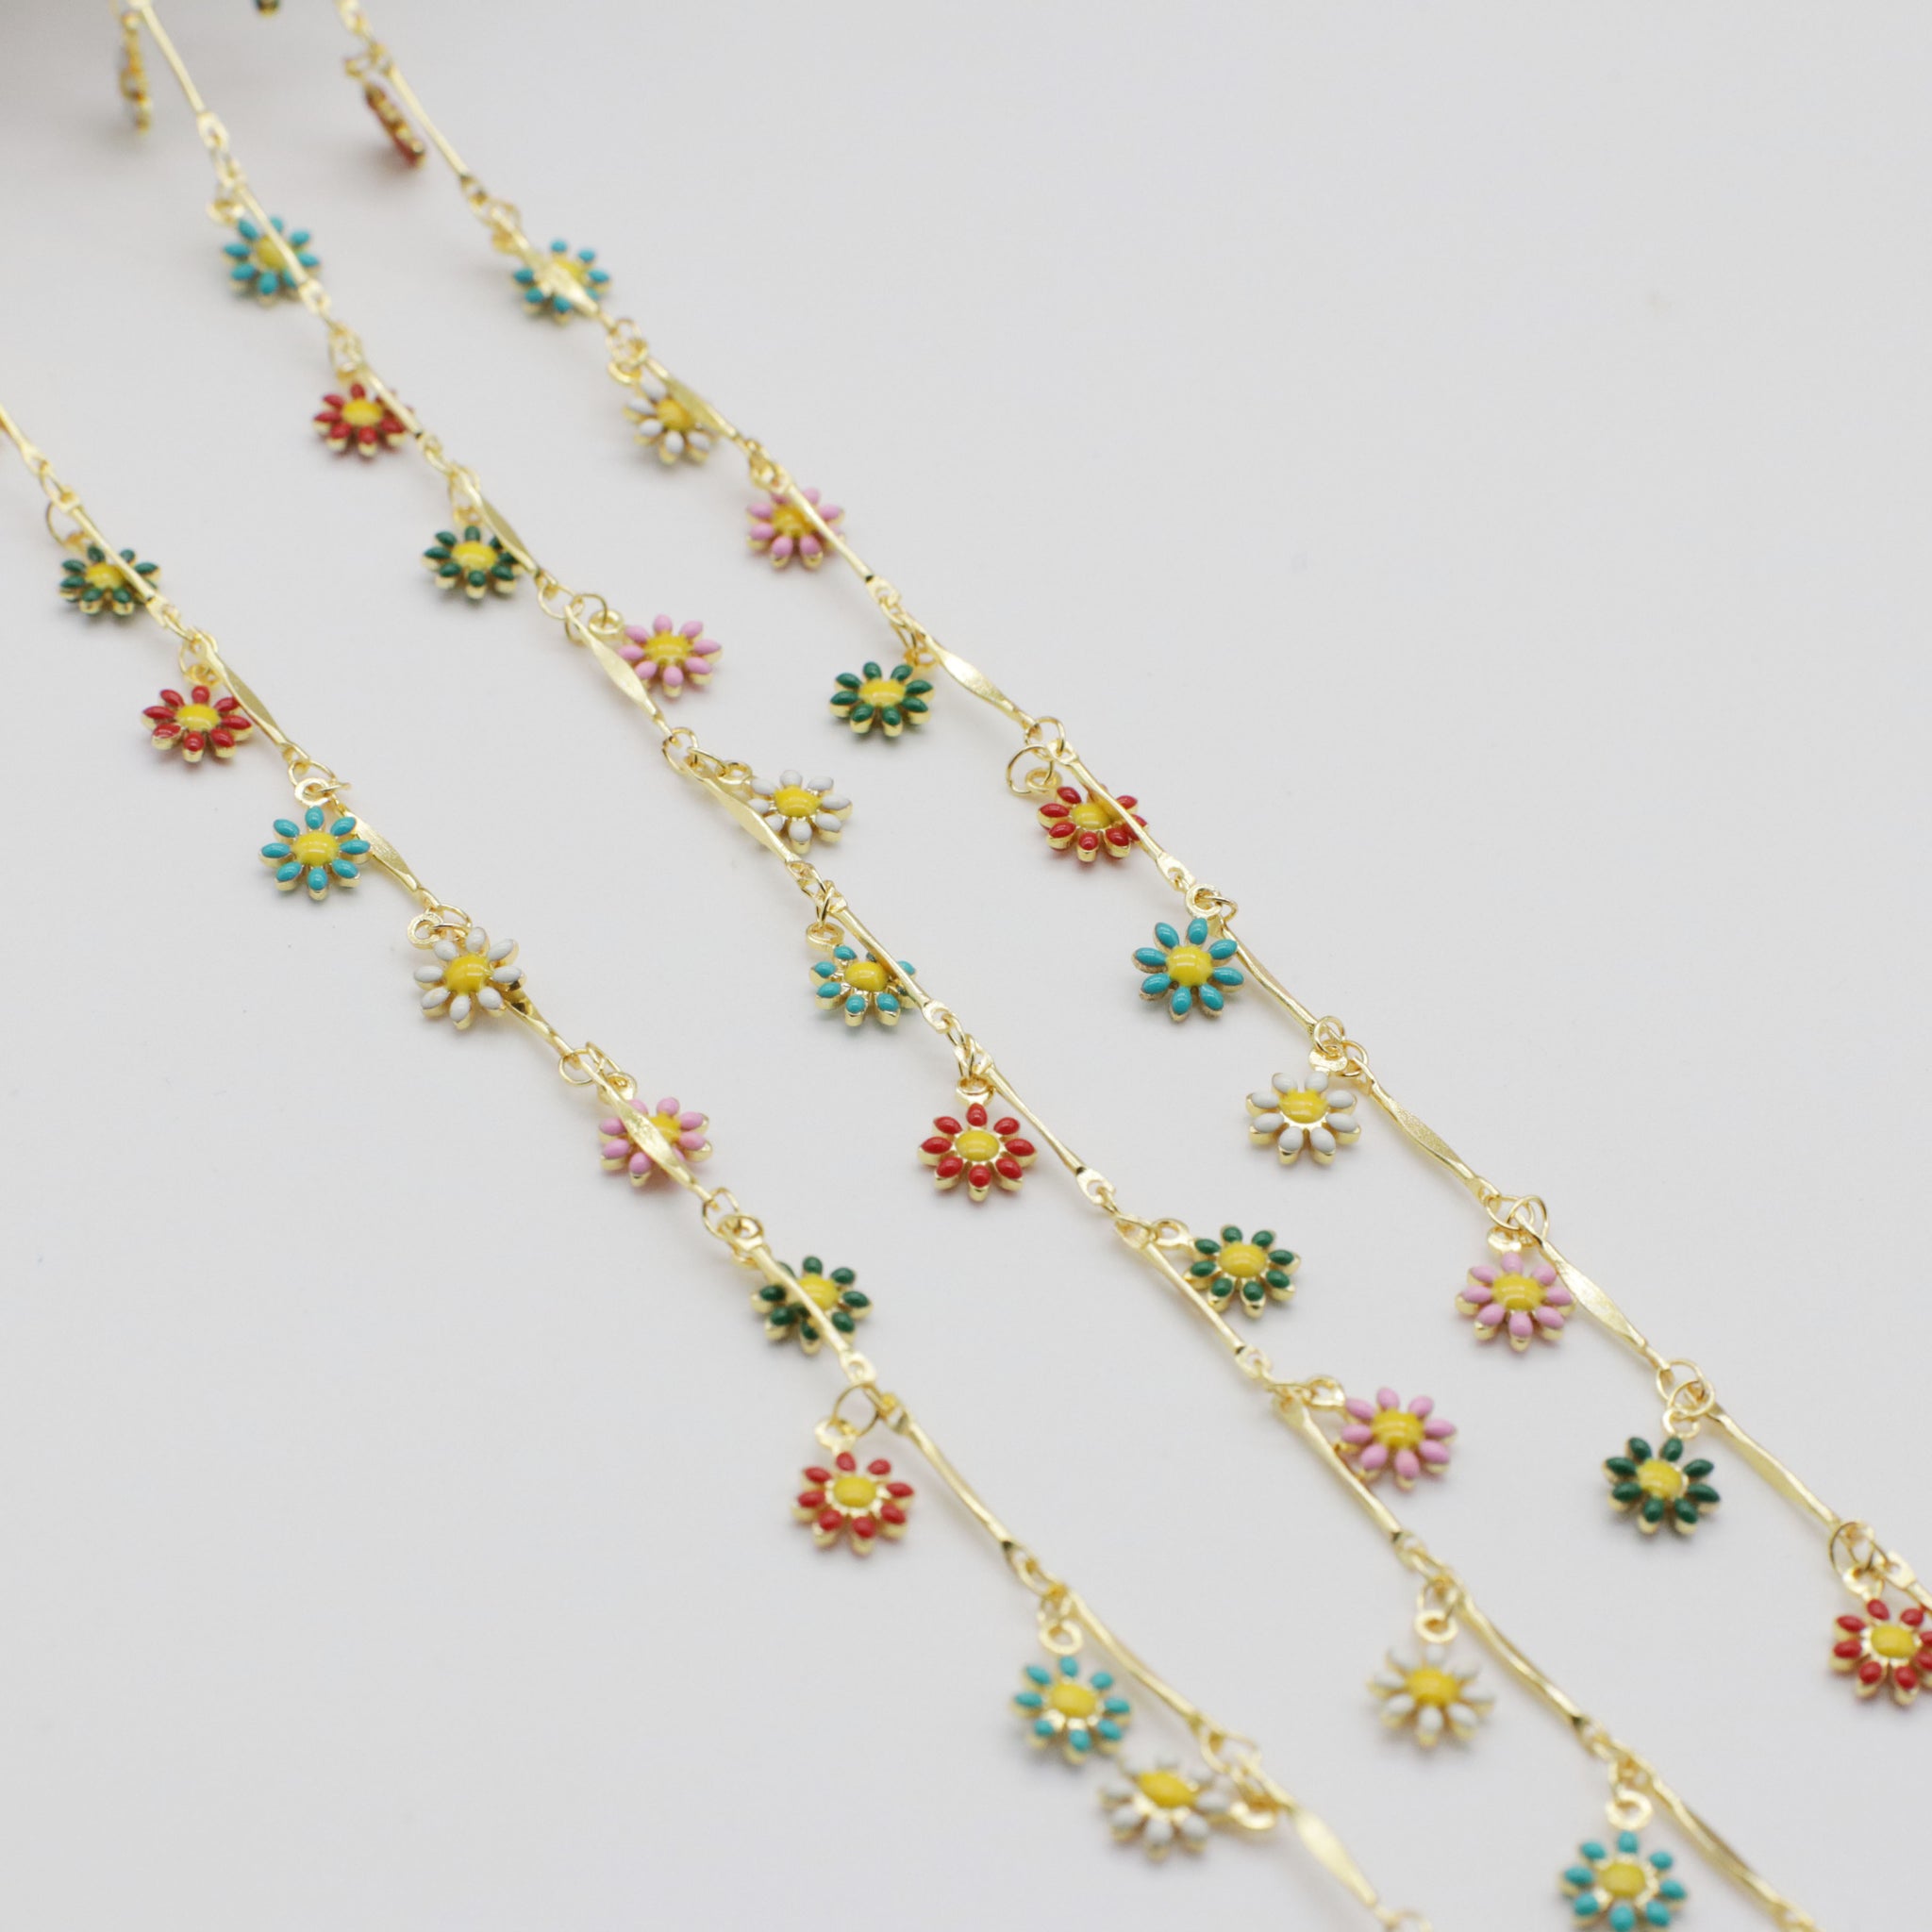 7MM Enameled Brass Dropped Sun Flower Chain Gold Plated For Jewelry Design Like Bracelet Anklet